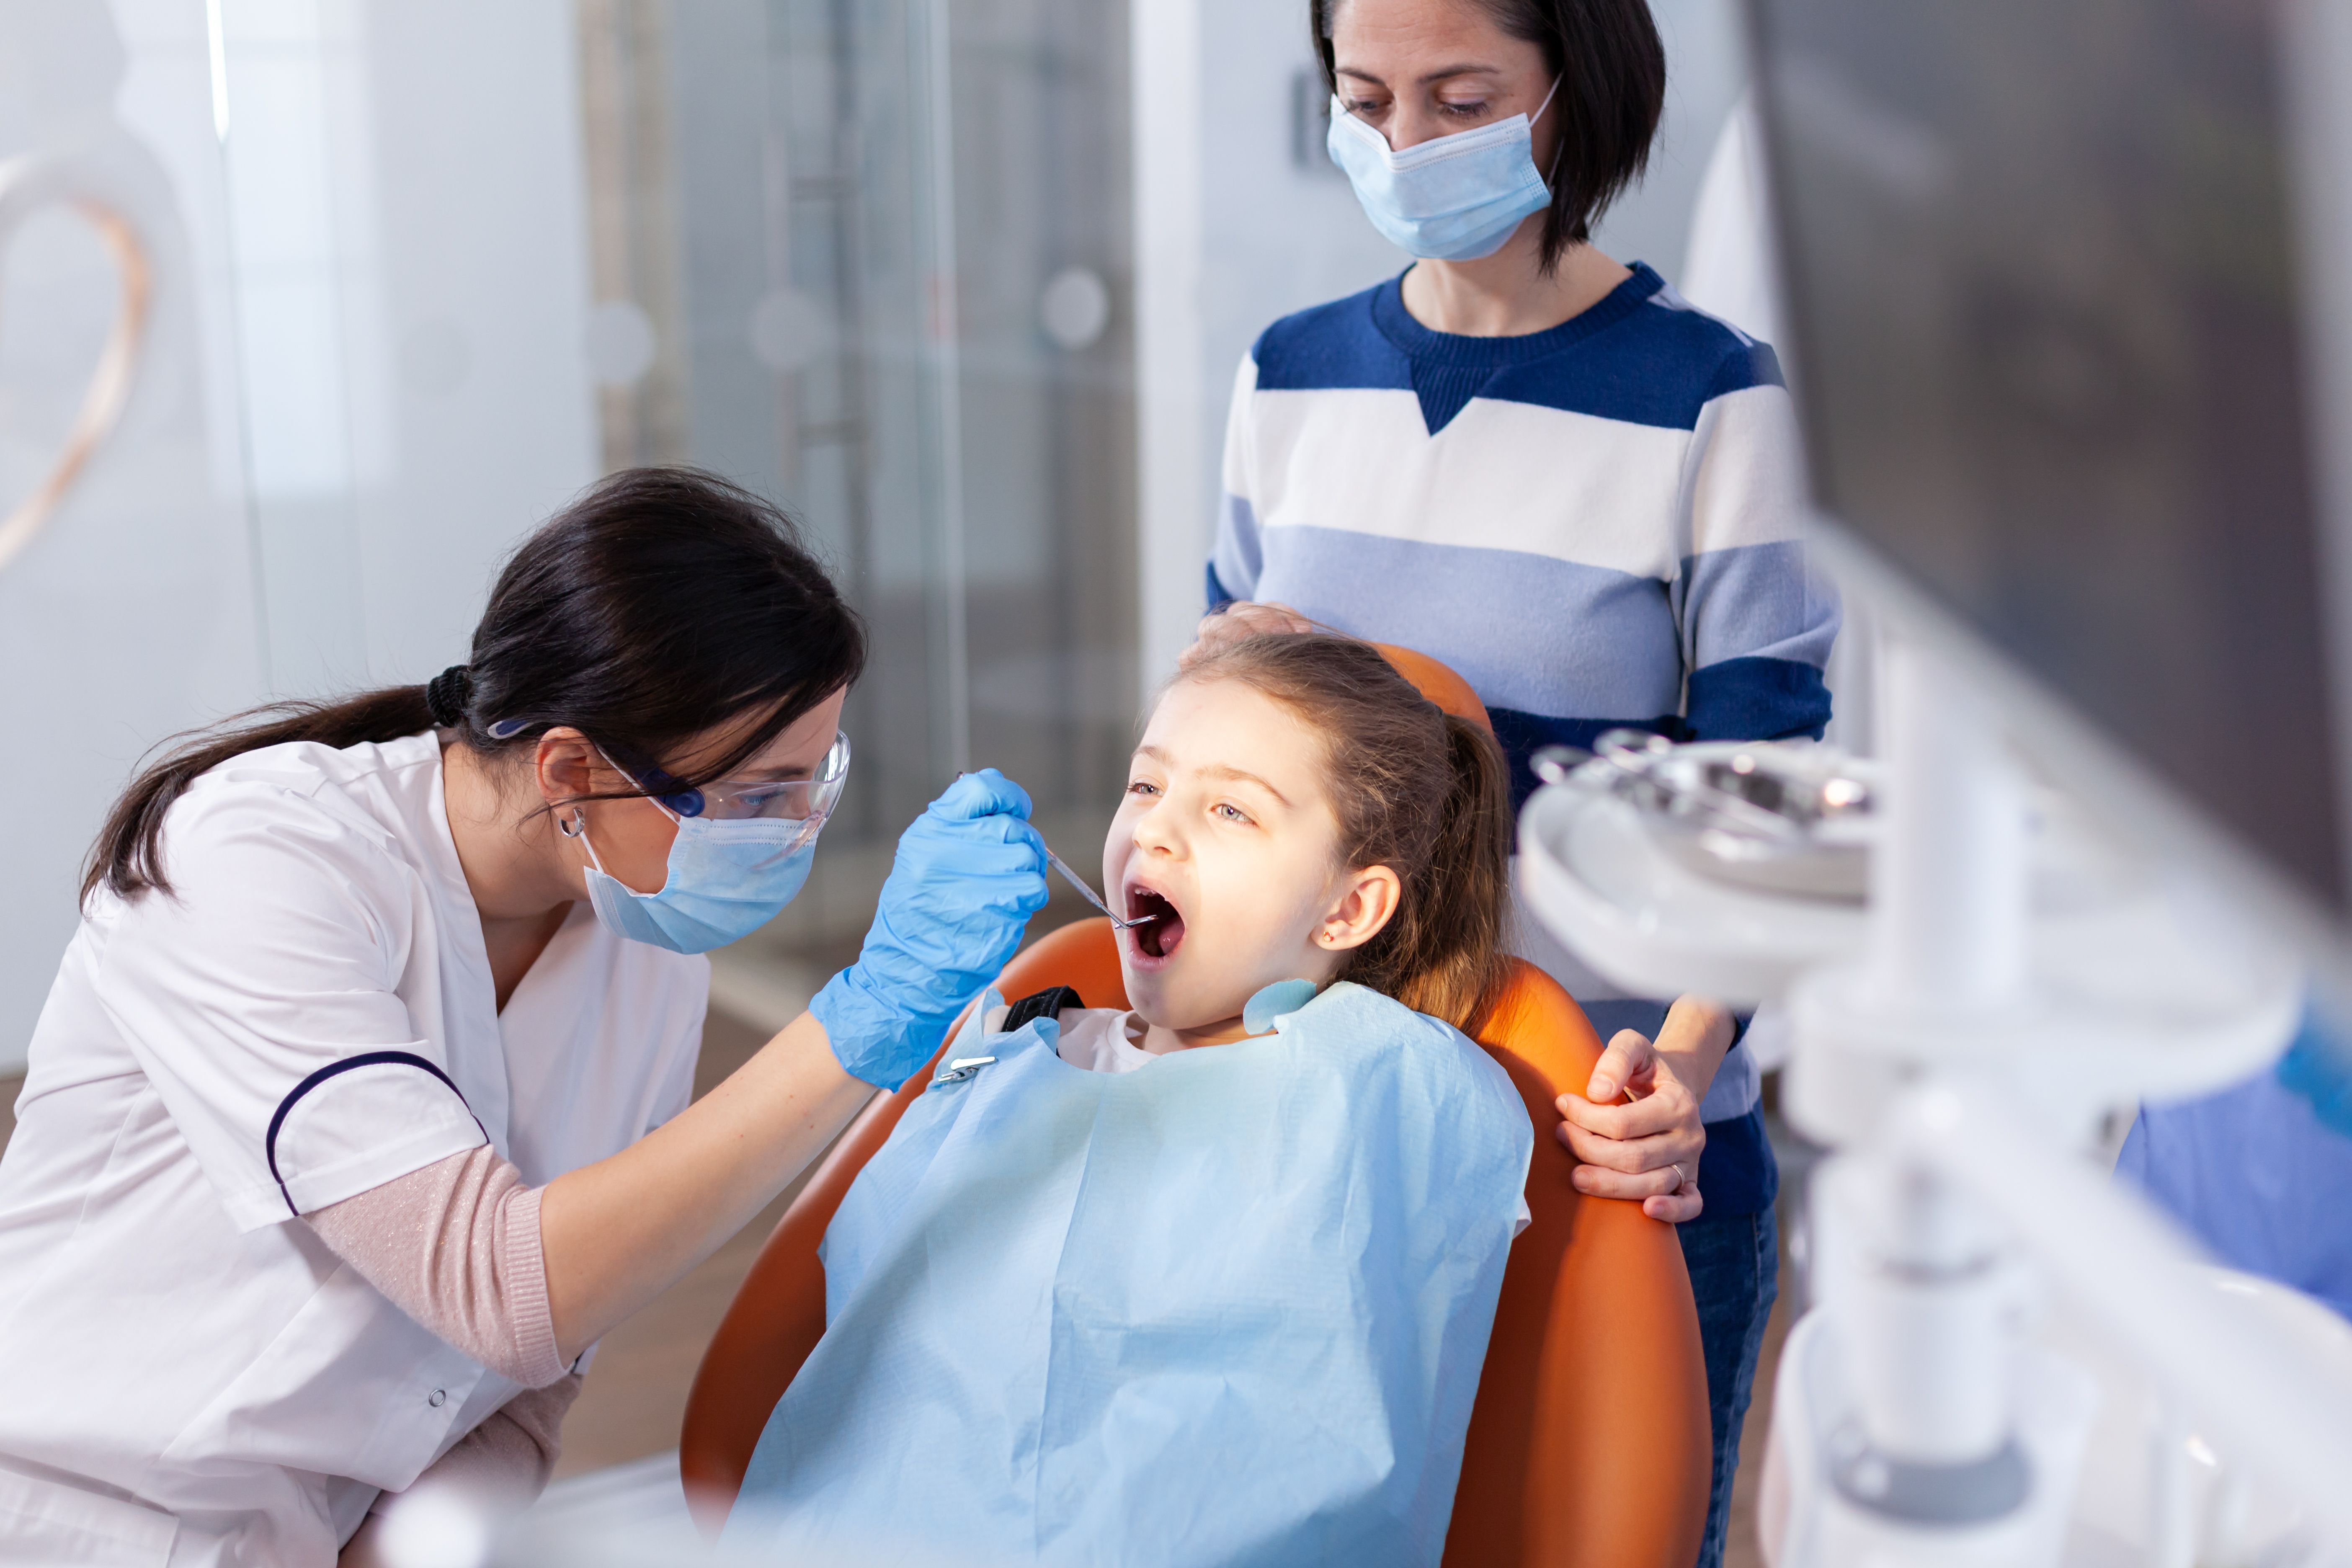 Pediatric Dental Pulp Therapy: Procedure and Benefits